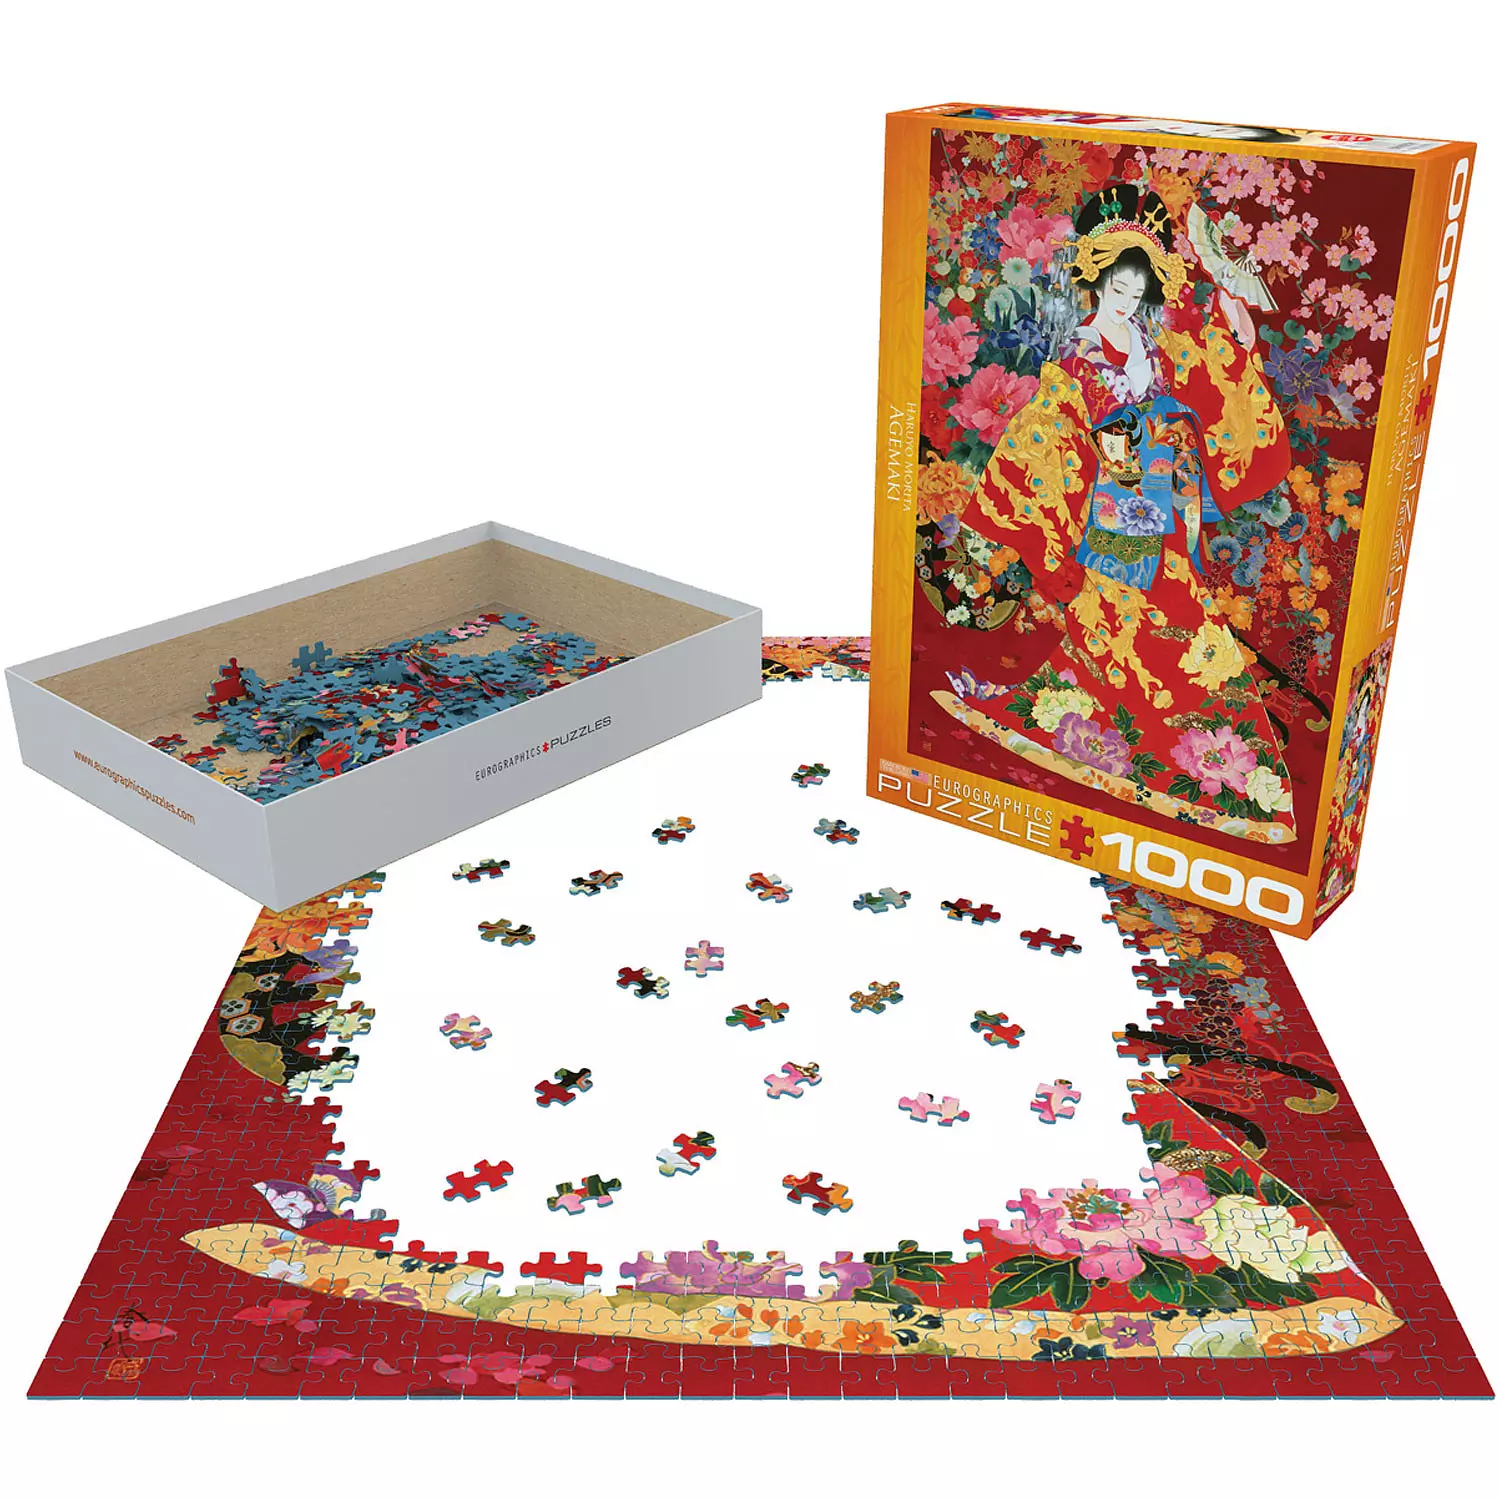 Mexican Table, 1000 Pieces, Eurographics